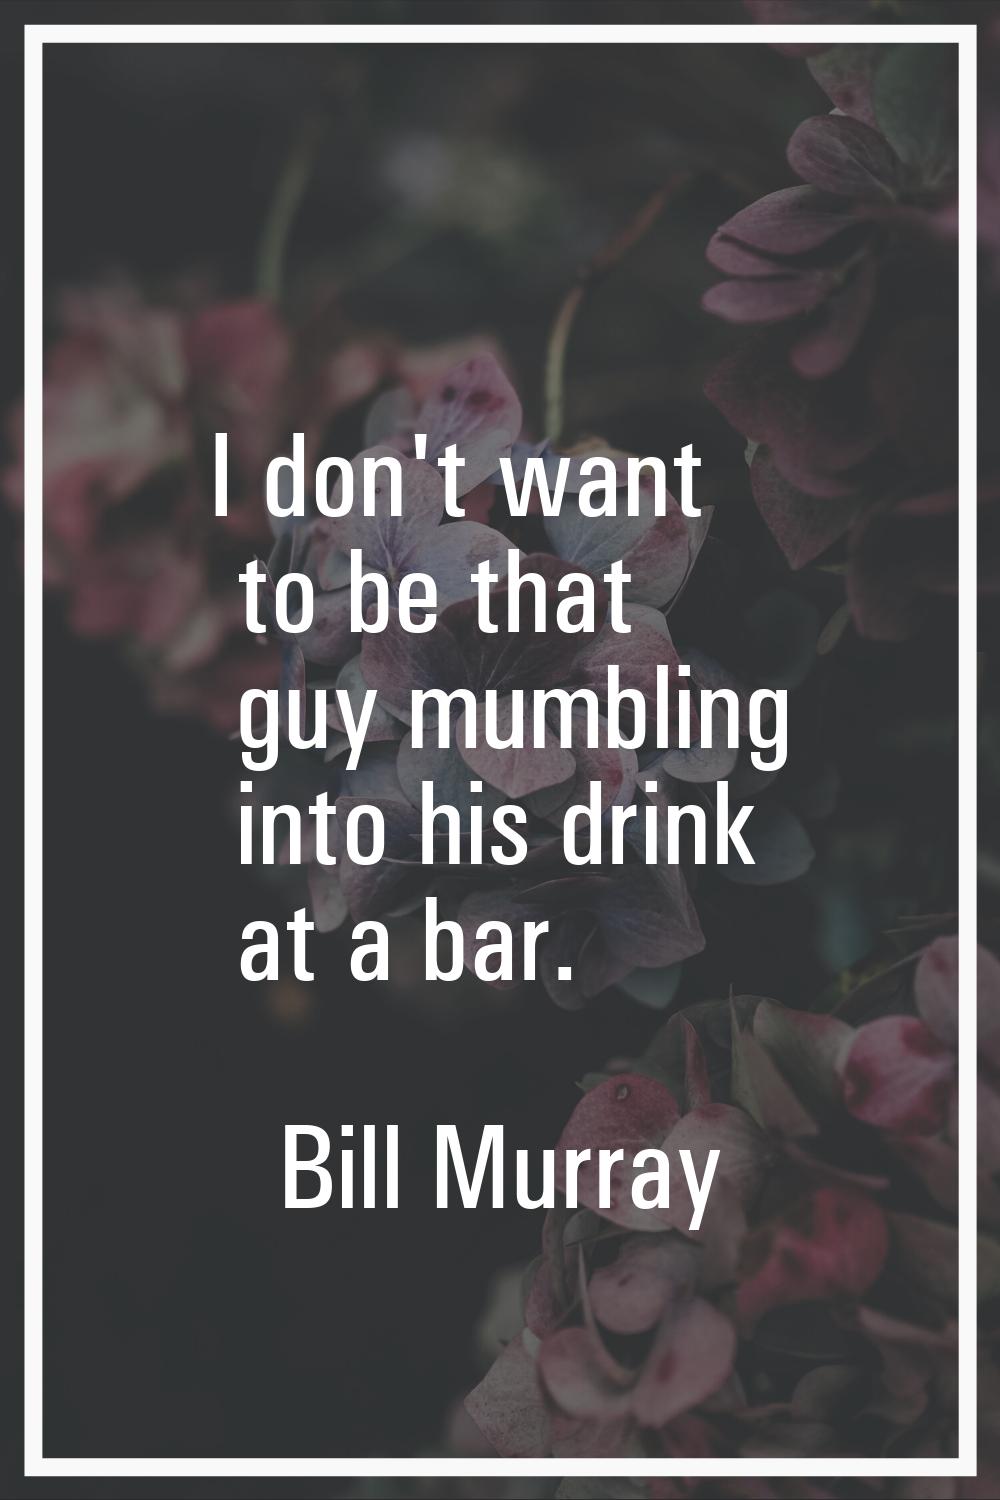 I don't want to be that guy mumbling into his drink at a bar.